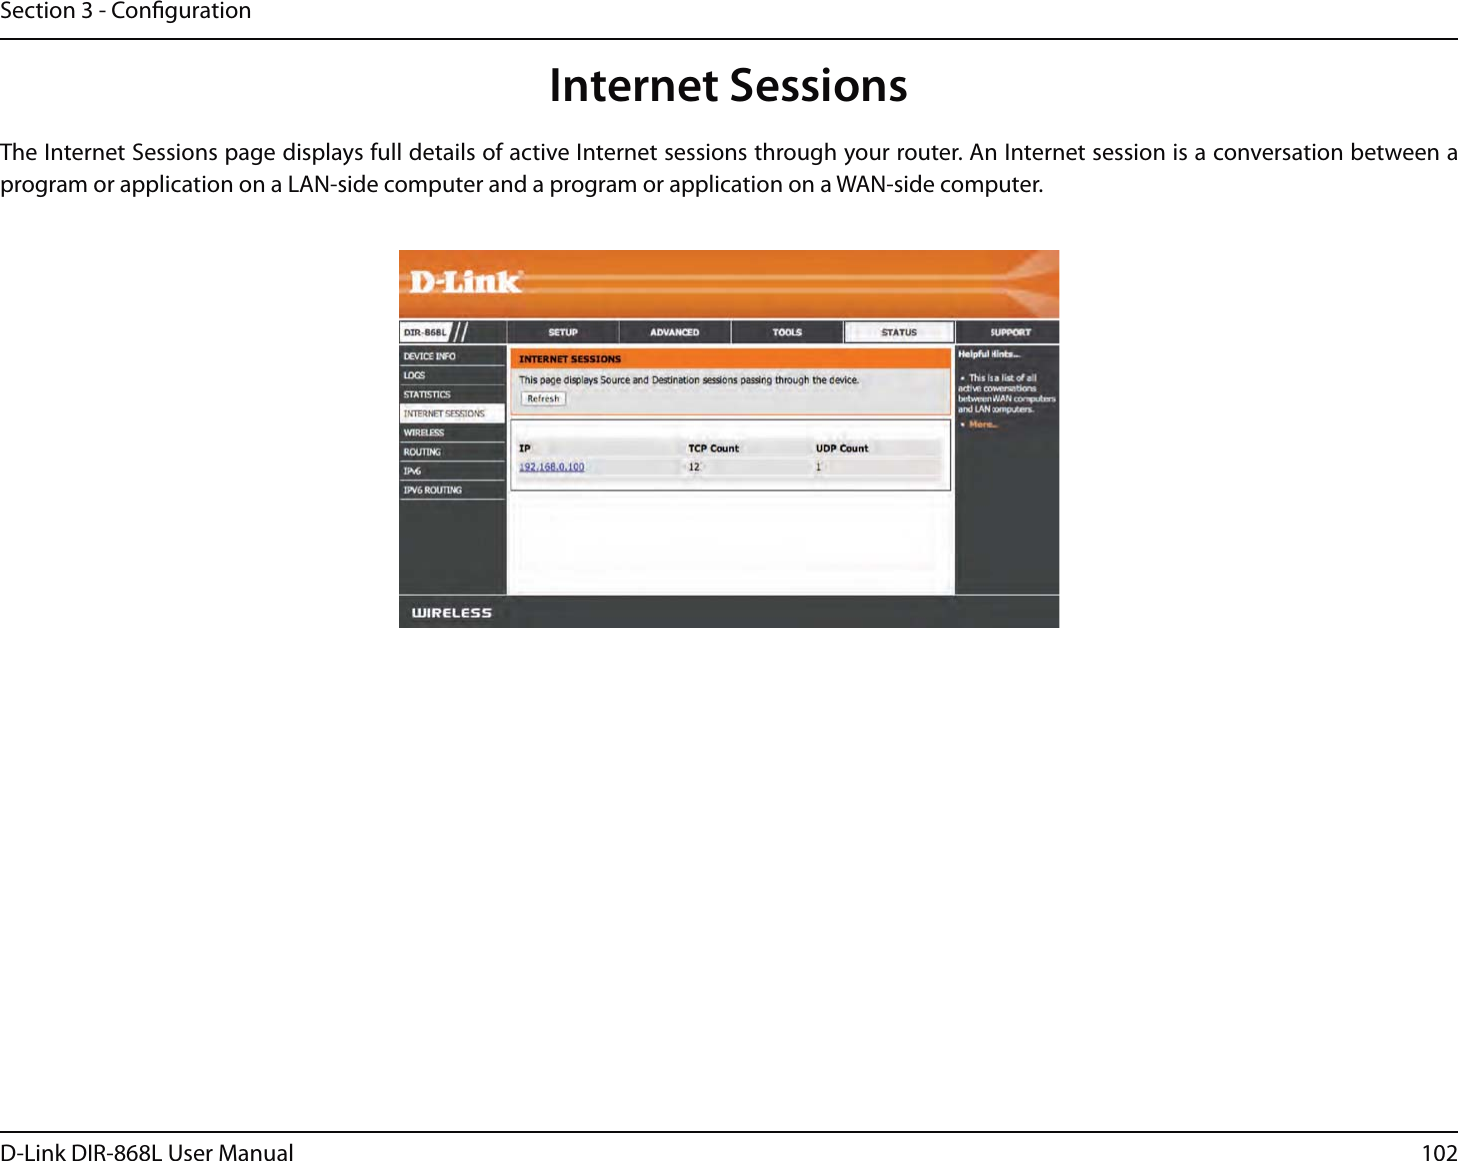 102D-Link DIR-868L User ManualSection 3 - CongurationInternet SessionsThe Internet Sessions page displays full details of active Internet sessions through your router. An Internet session is a conversation between a program or application on a LAN-side computer and a program or application on a WAN-side computer. 